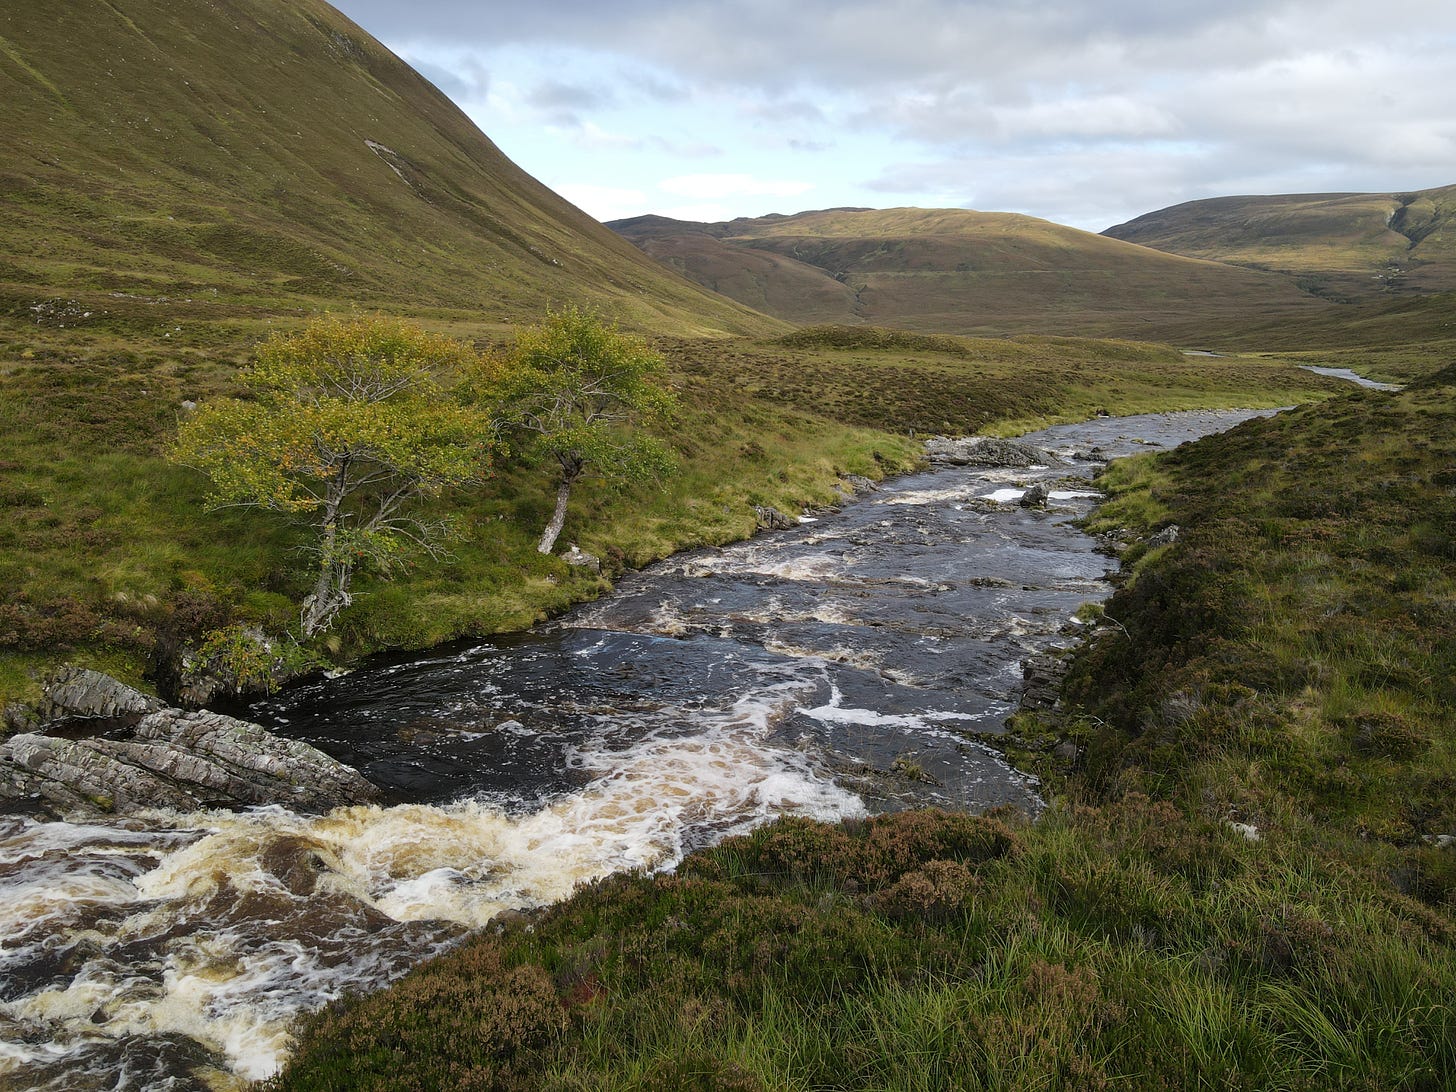 Landscape shot of a river surrounded by valleys in Scotland on a cloudy day